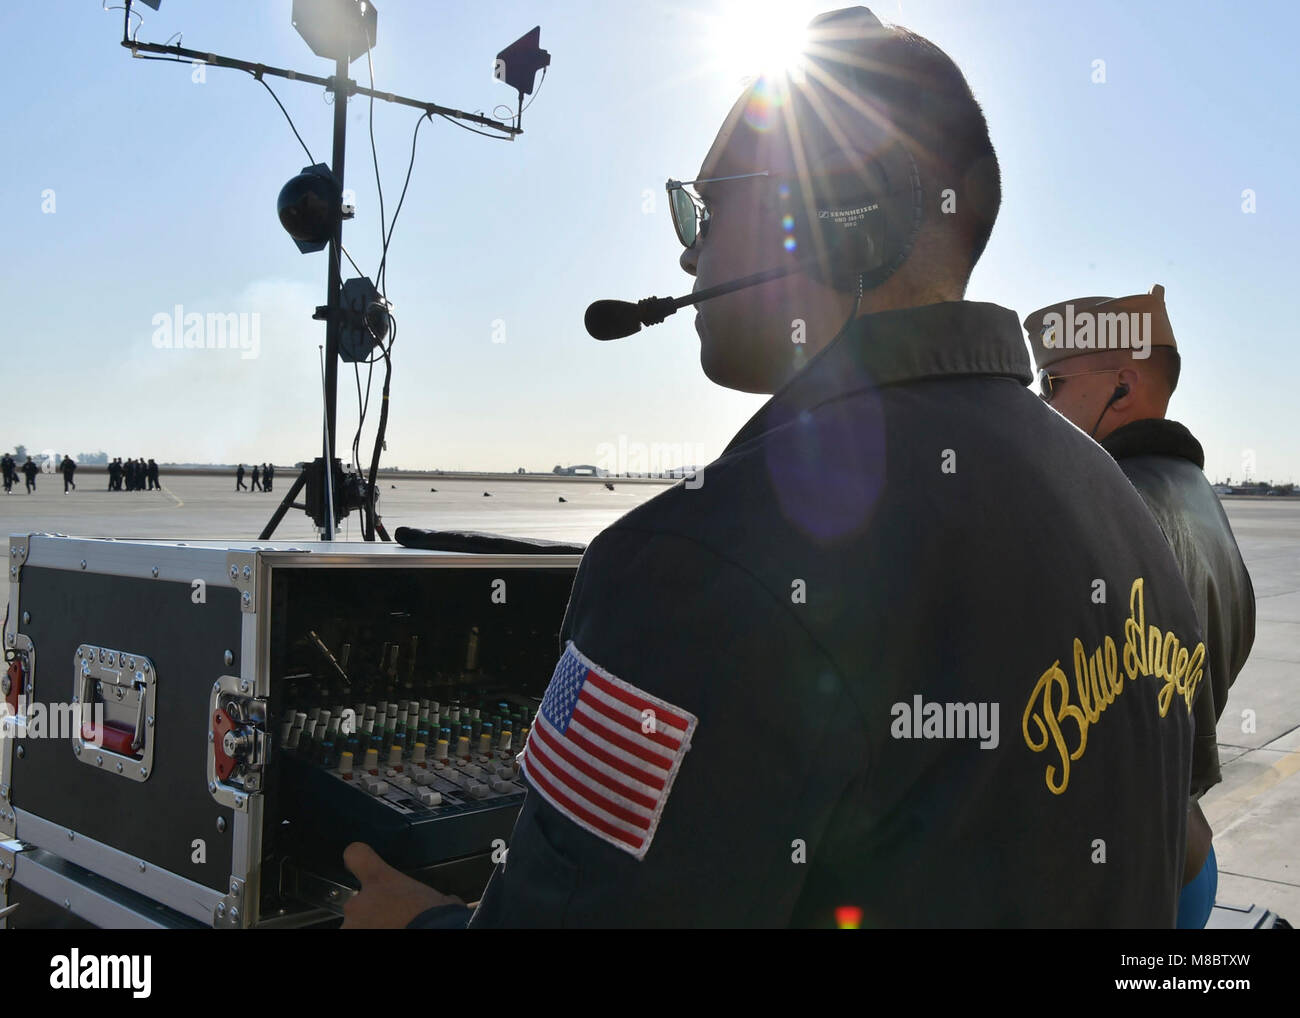 EL CENTRO, Calif. (Feb. 22, 2018) Yeoman 2nd Class, Jaime Del Toro, operates music and narration equipment during a practice demonstration. The Blue Angels are scheduled to perform more than 60 demonstrations at more than 30 locations across the U.S. in 2018. (U.S. Navy Stock Photo